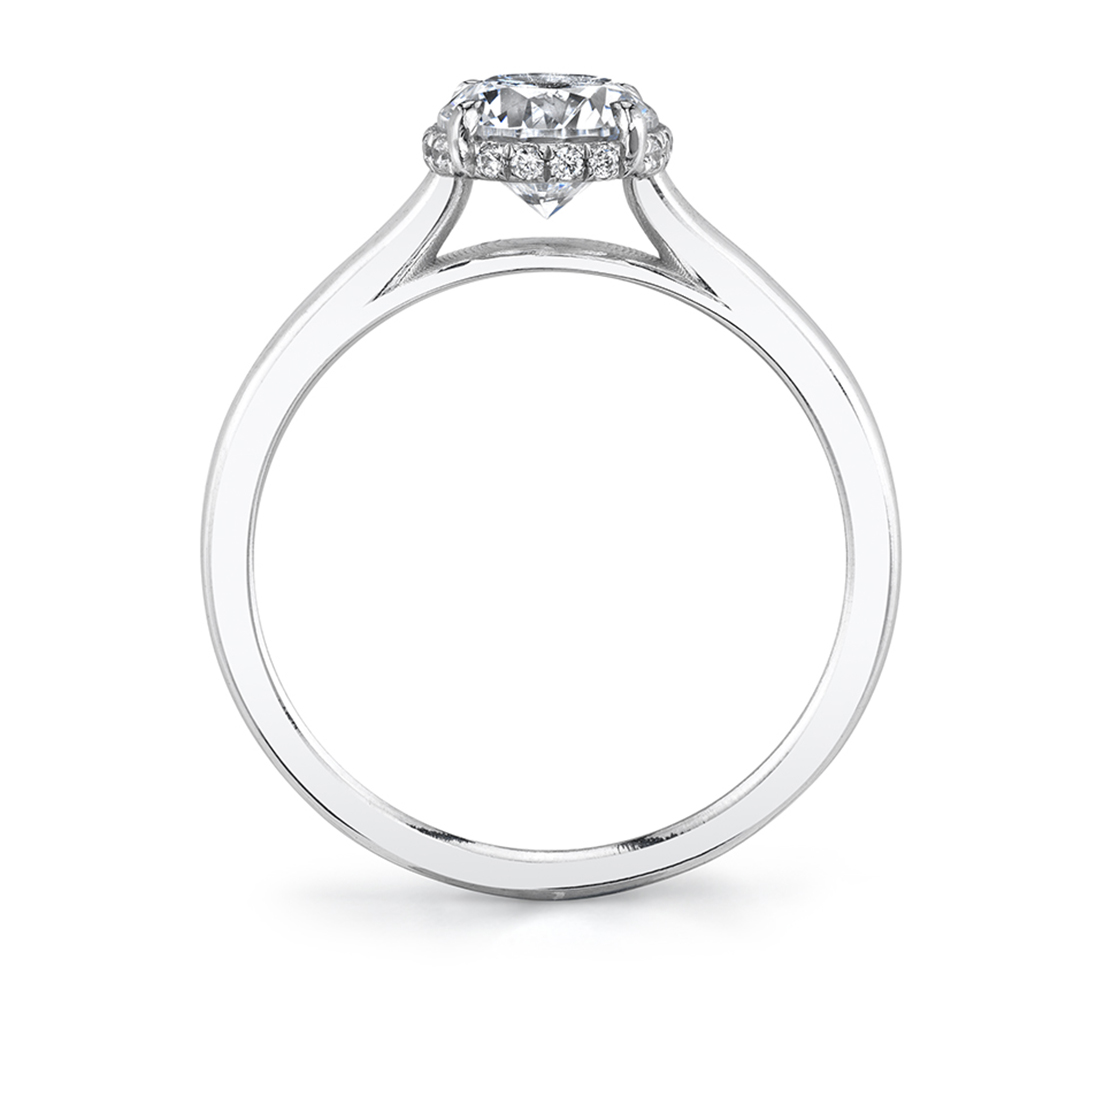 Profile image of a Solitaire Engagement Ring with hidden halo 